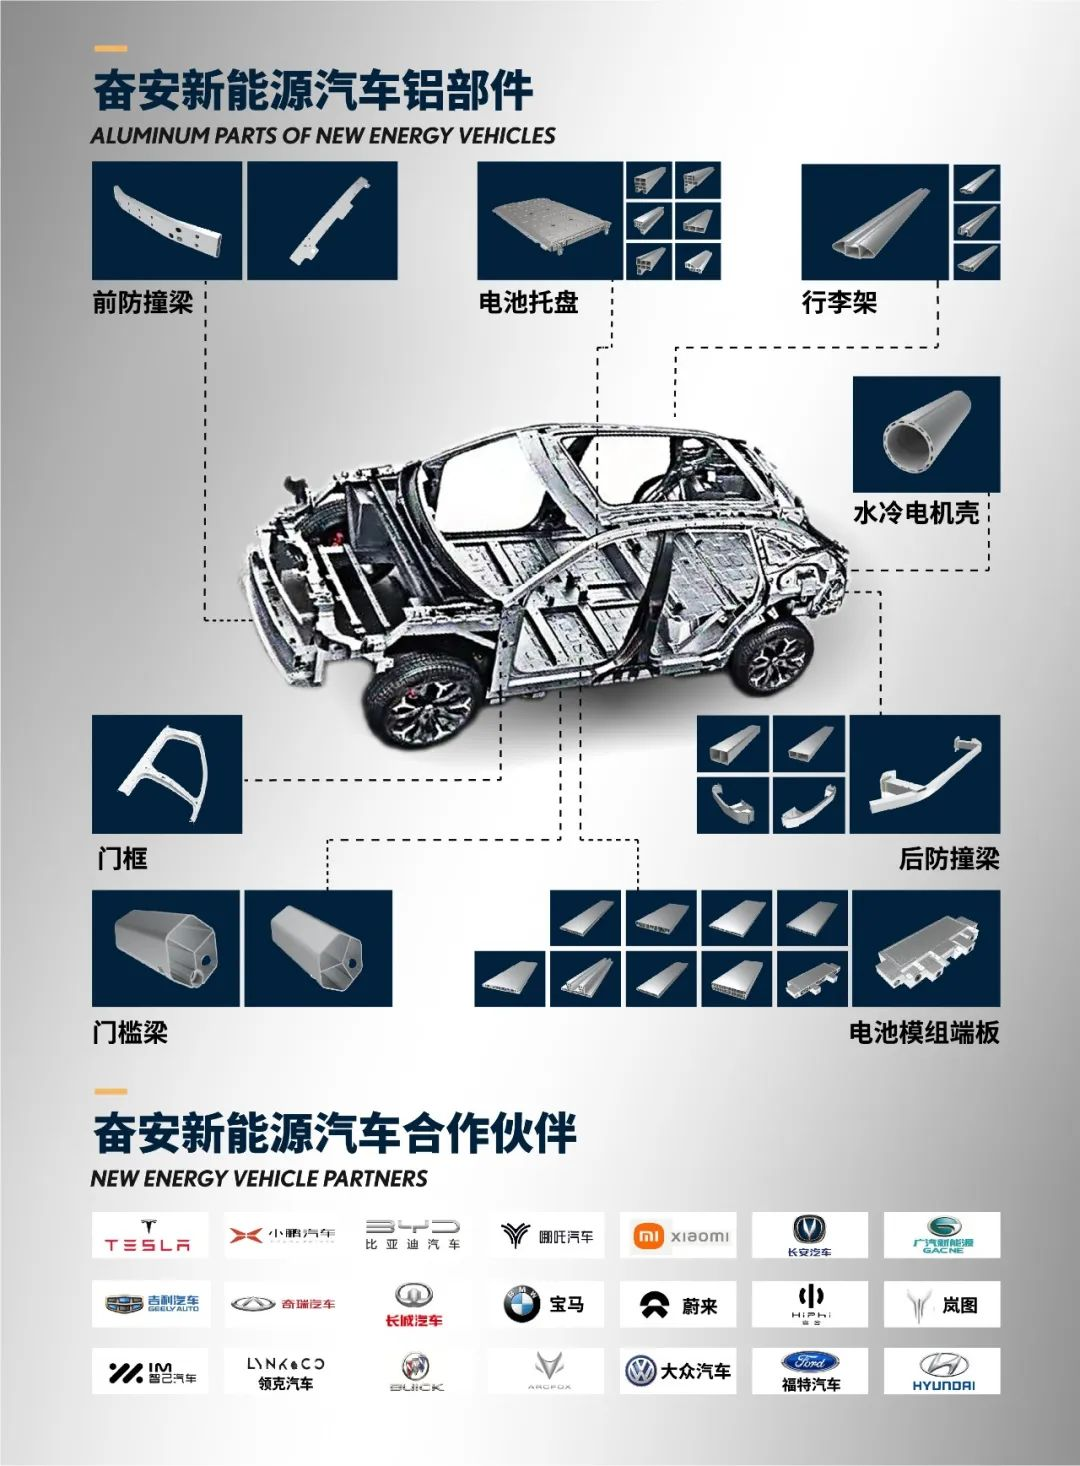 [Product application case] Fen’an automobile aluminum parts are applied to Euler new energy vehicles